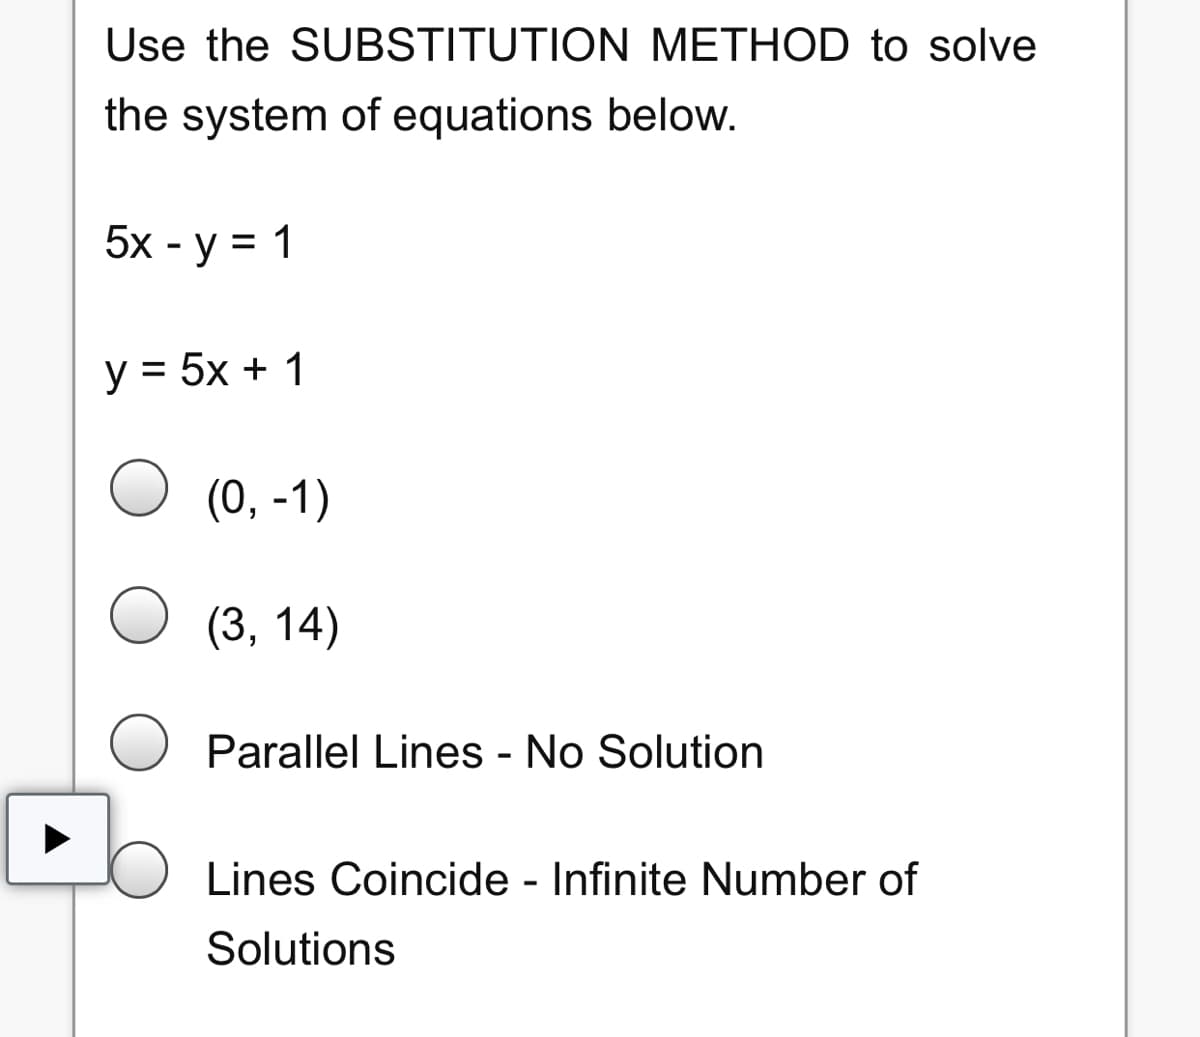 Use the SUBSTITUTION METHOD to solve
the system of equations below.
5х - у %3D 1
y = 5x + 1
(0, -1)
О (3, 14)
Parallel Lines - No Solution
Lines Coincide - Infinite Number of
Solutions
